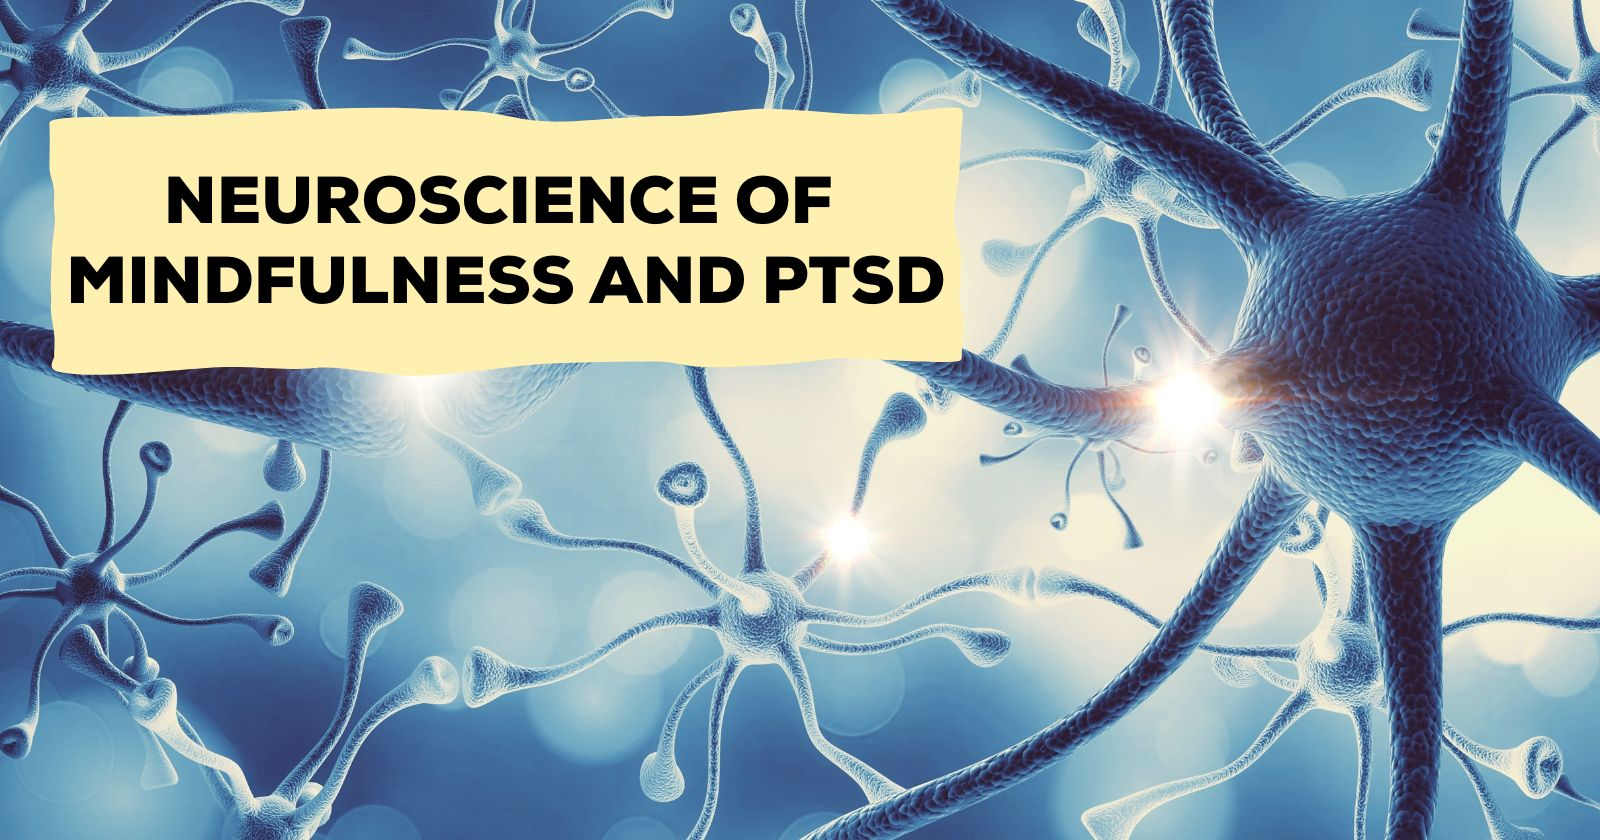 Neuroscience of Mindfulness and PTSD

Neurons on back side as a background